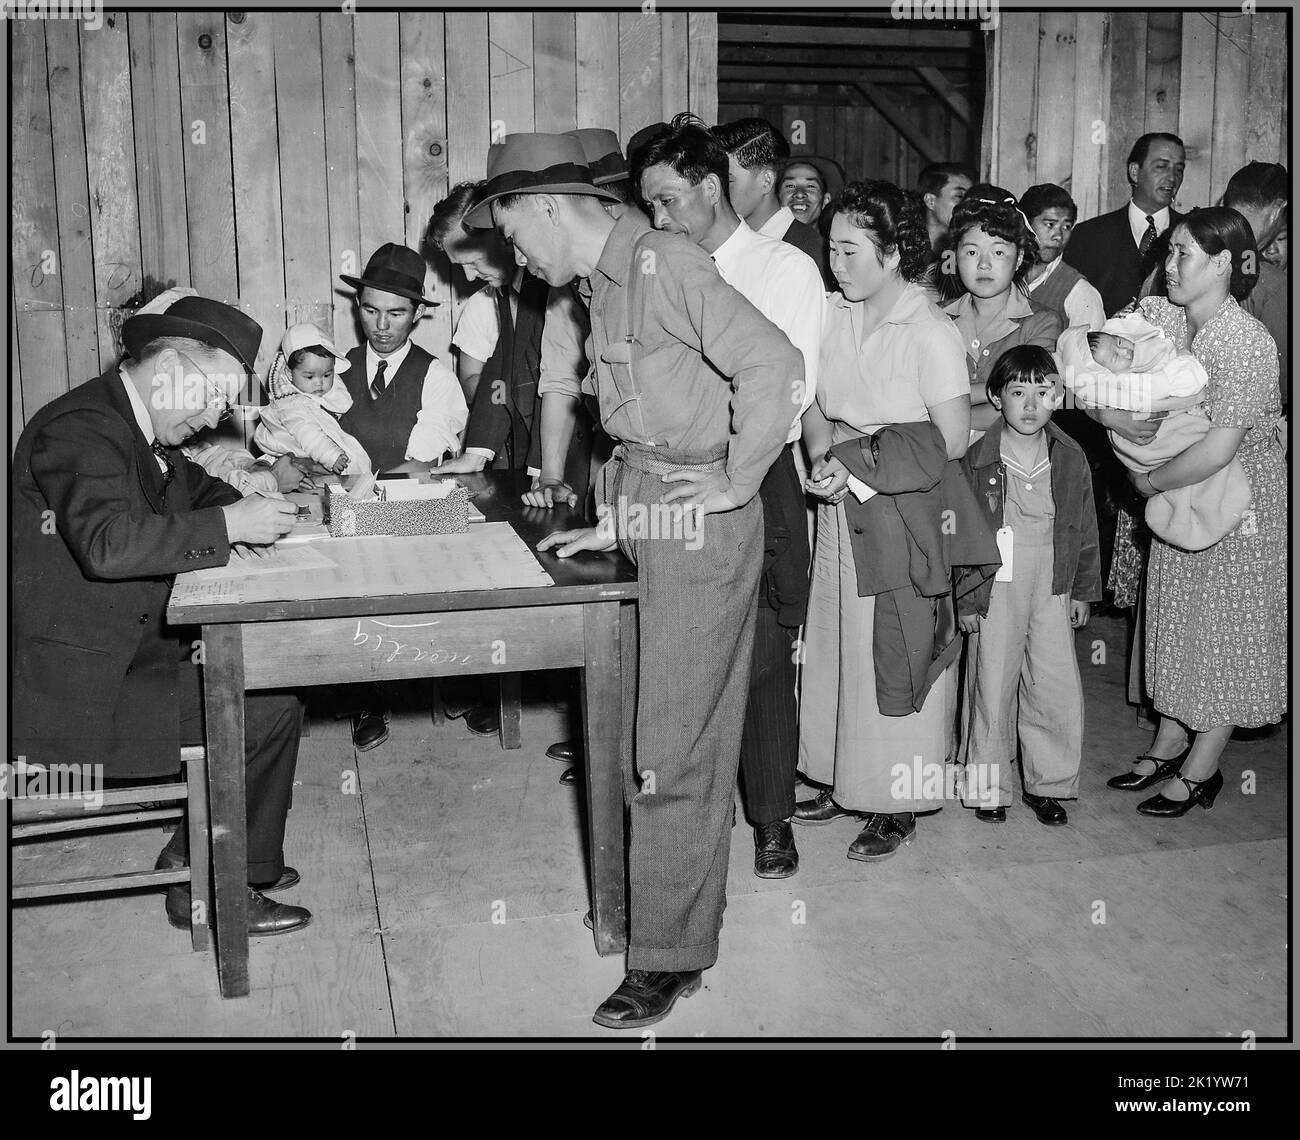 WW2 Japanese citizens relocating in the USA Arcadia, California. Attendants register arrivals at Santa Anita assembly center and assign them family by family, to new quarters. The family unit is kept intact. These evacuees of Japanese ancestry are transferred later to War Relocation Authority centers for the duration. Date5 April 1942 Stock Photo